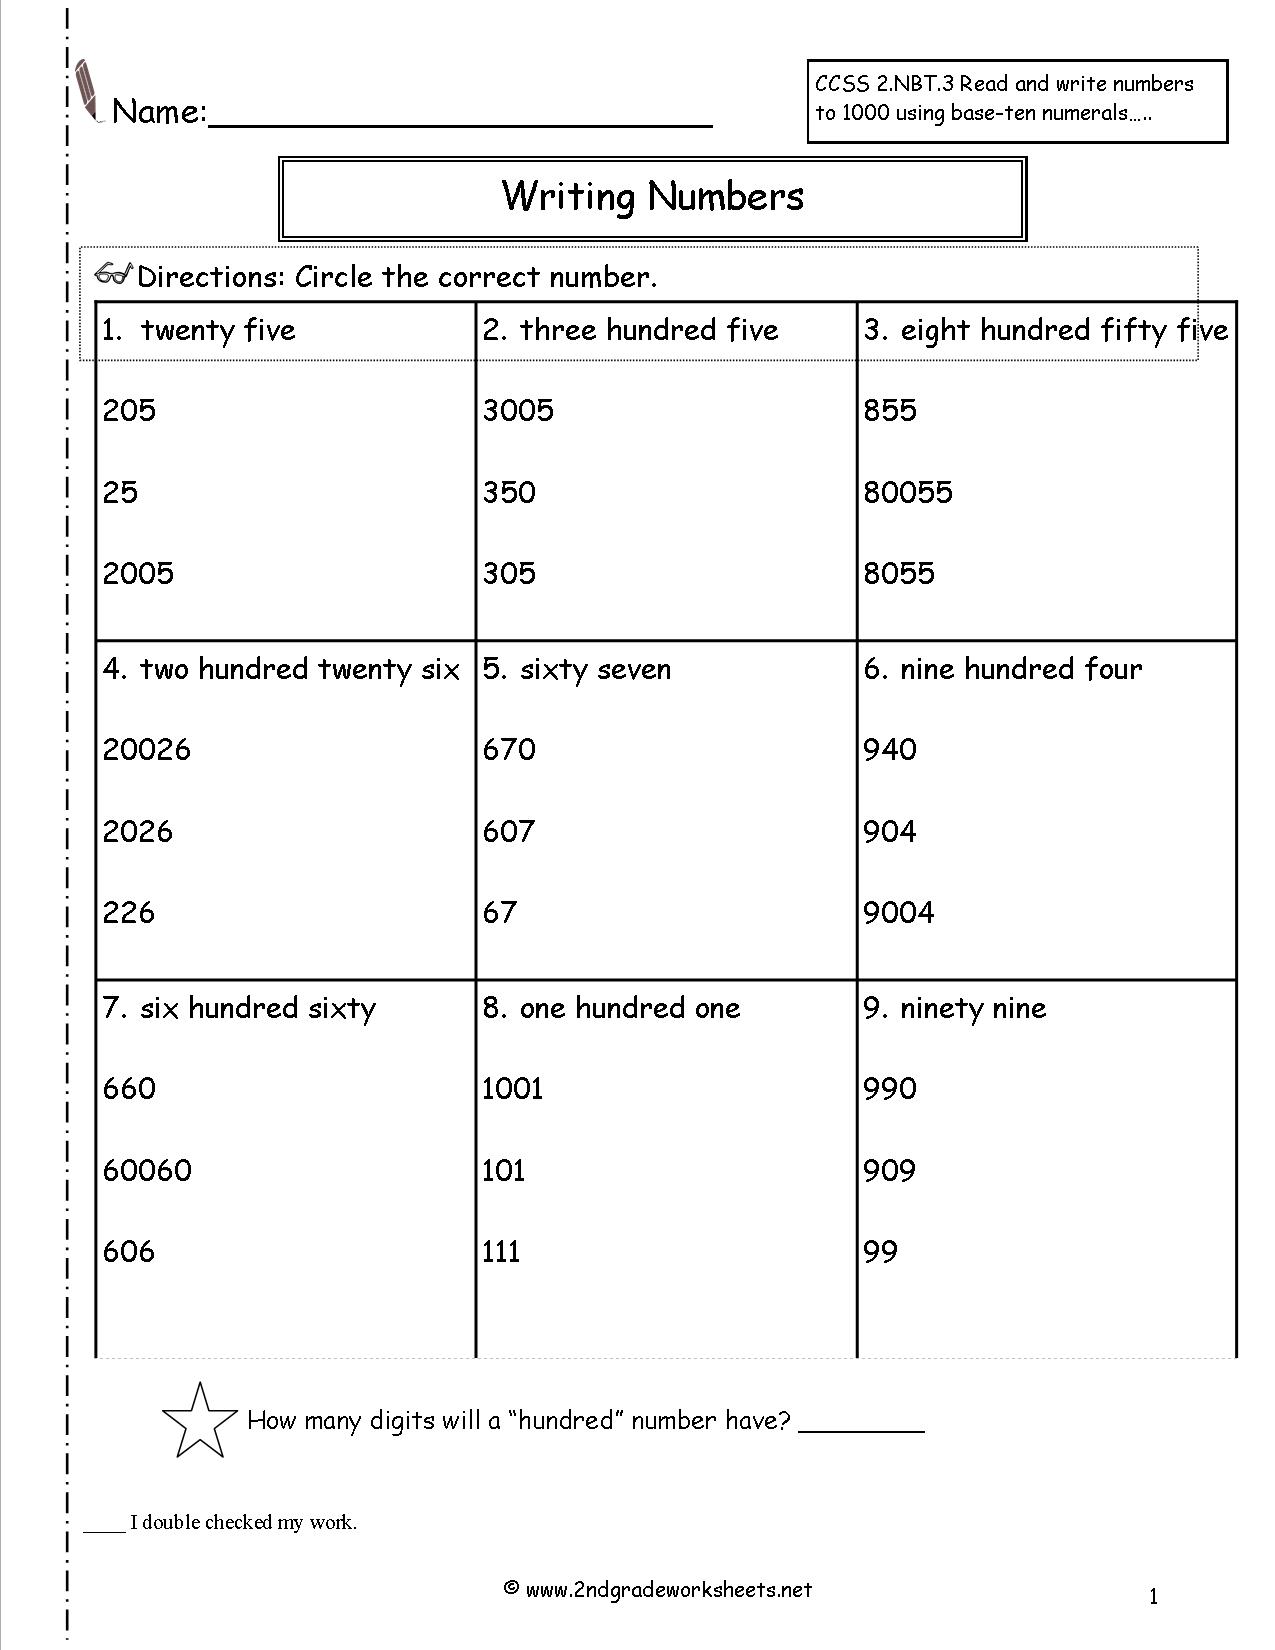 Reading and Writing Numbers Worksheets